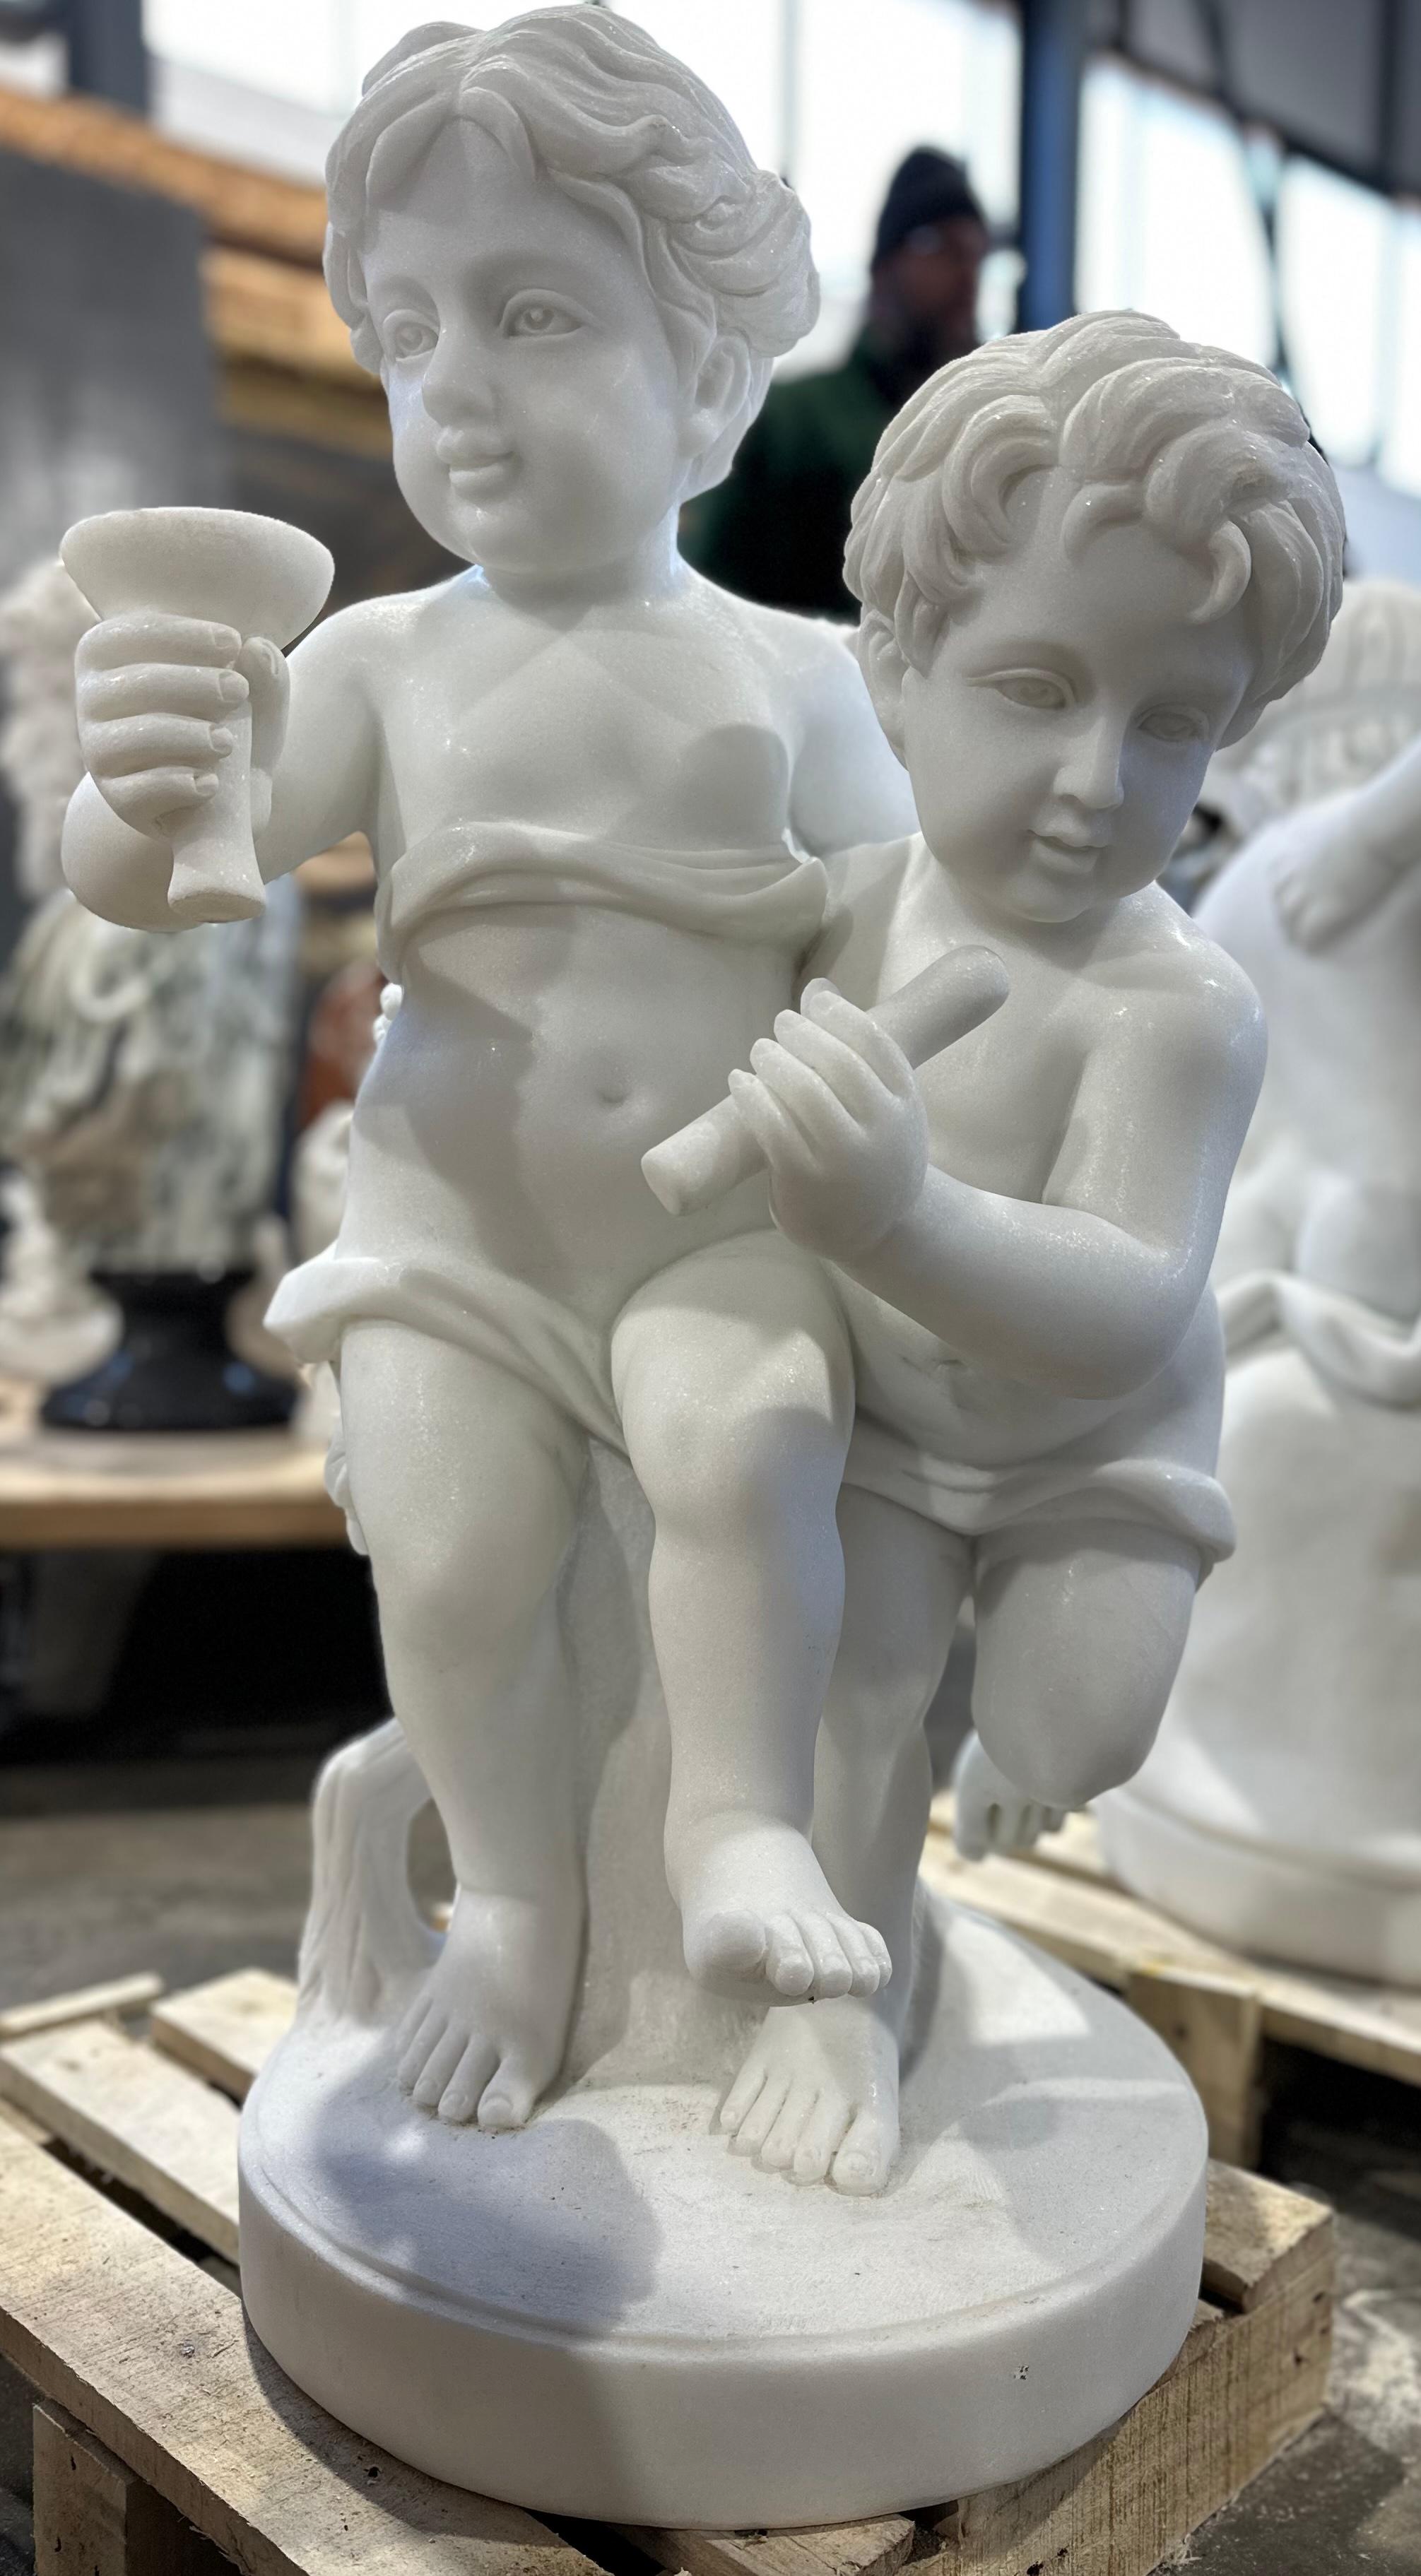 A elegant white marble sculpture of two childlike putti, merrily walking with one drinking from a cup as the other leans against a bough. 
The carving is clear and detailed from the wavy hair of the putti to their rounded, smooth forms and the